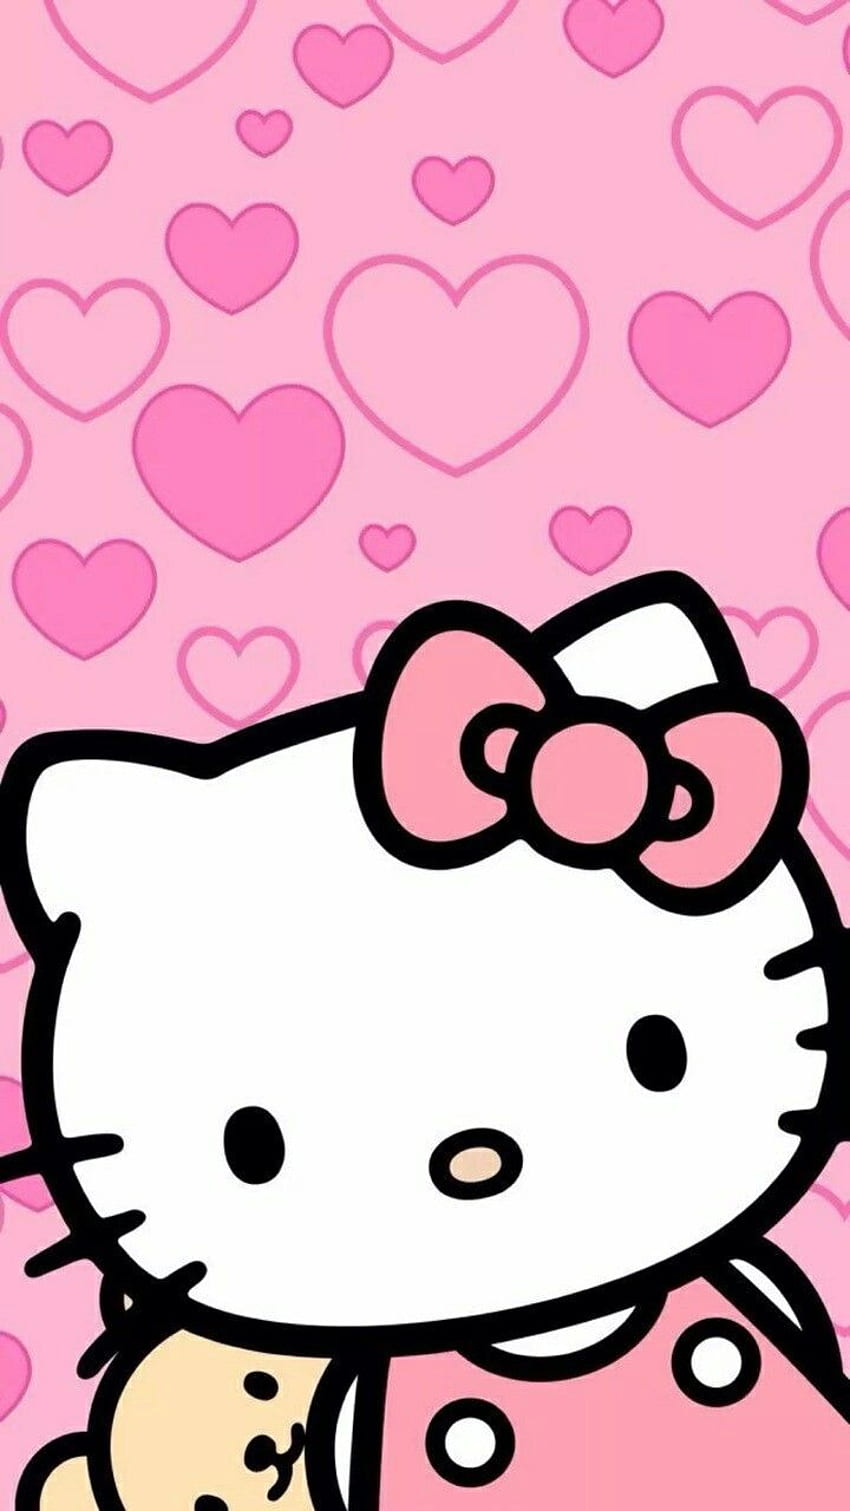 Cute Hello Kitty Wallpapers For Girls, Download Now